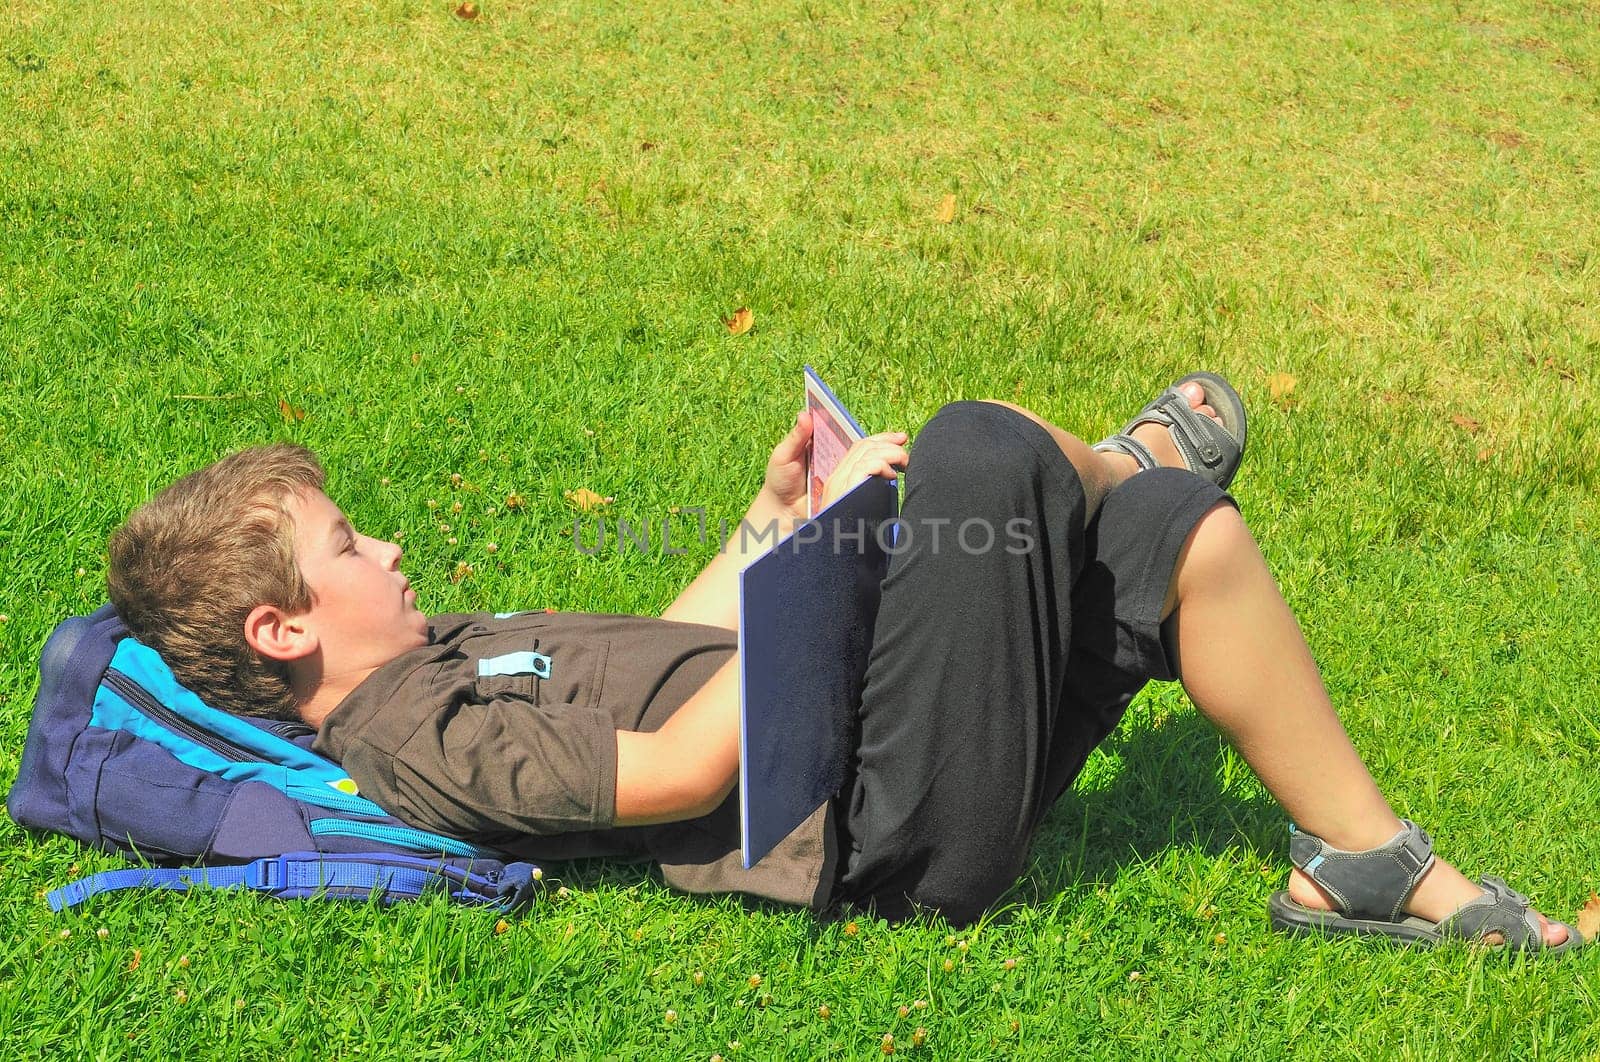 The boy, after school, lay on the grass and reading a book